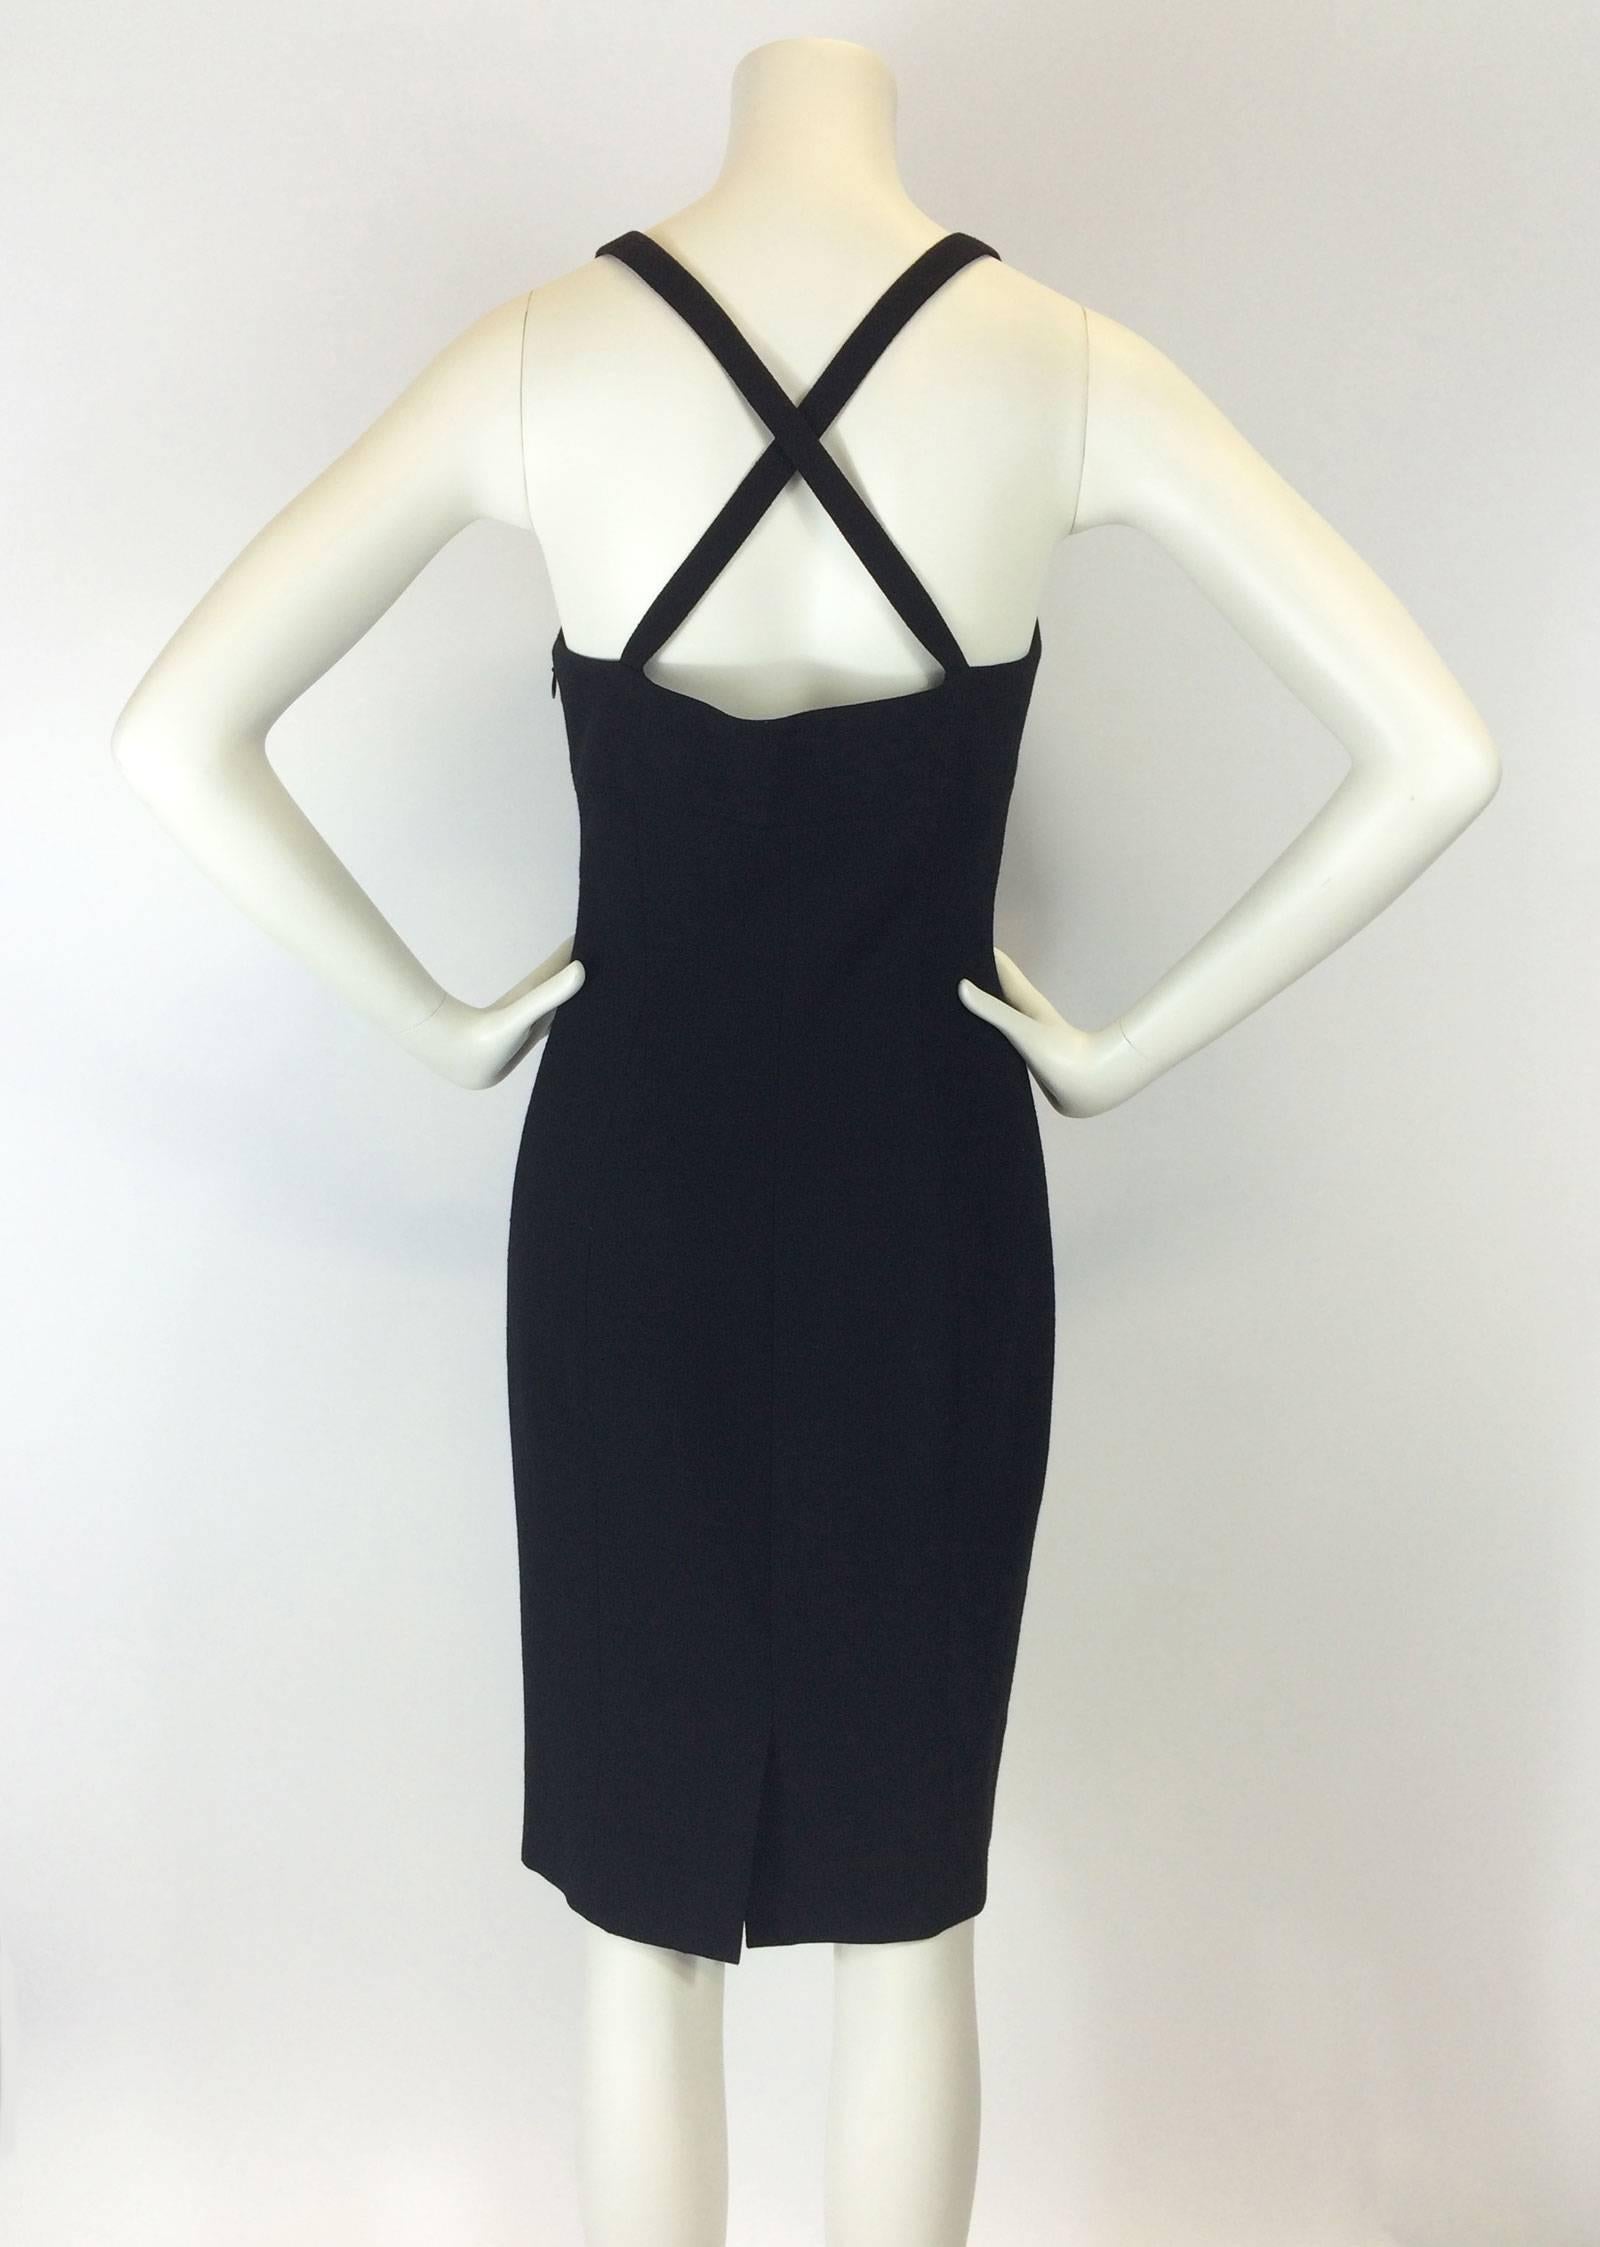 Gianni Versace Black Bodycon Cocktail Dress In Excellent Condition In Oakland, CA